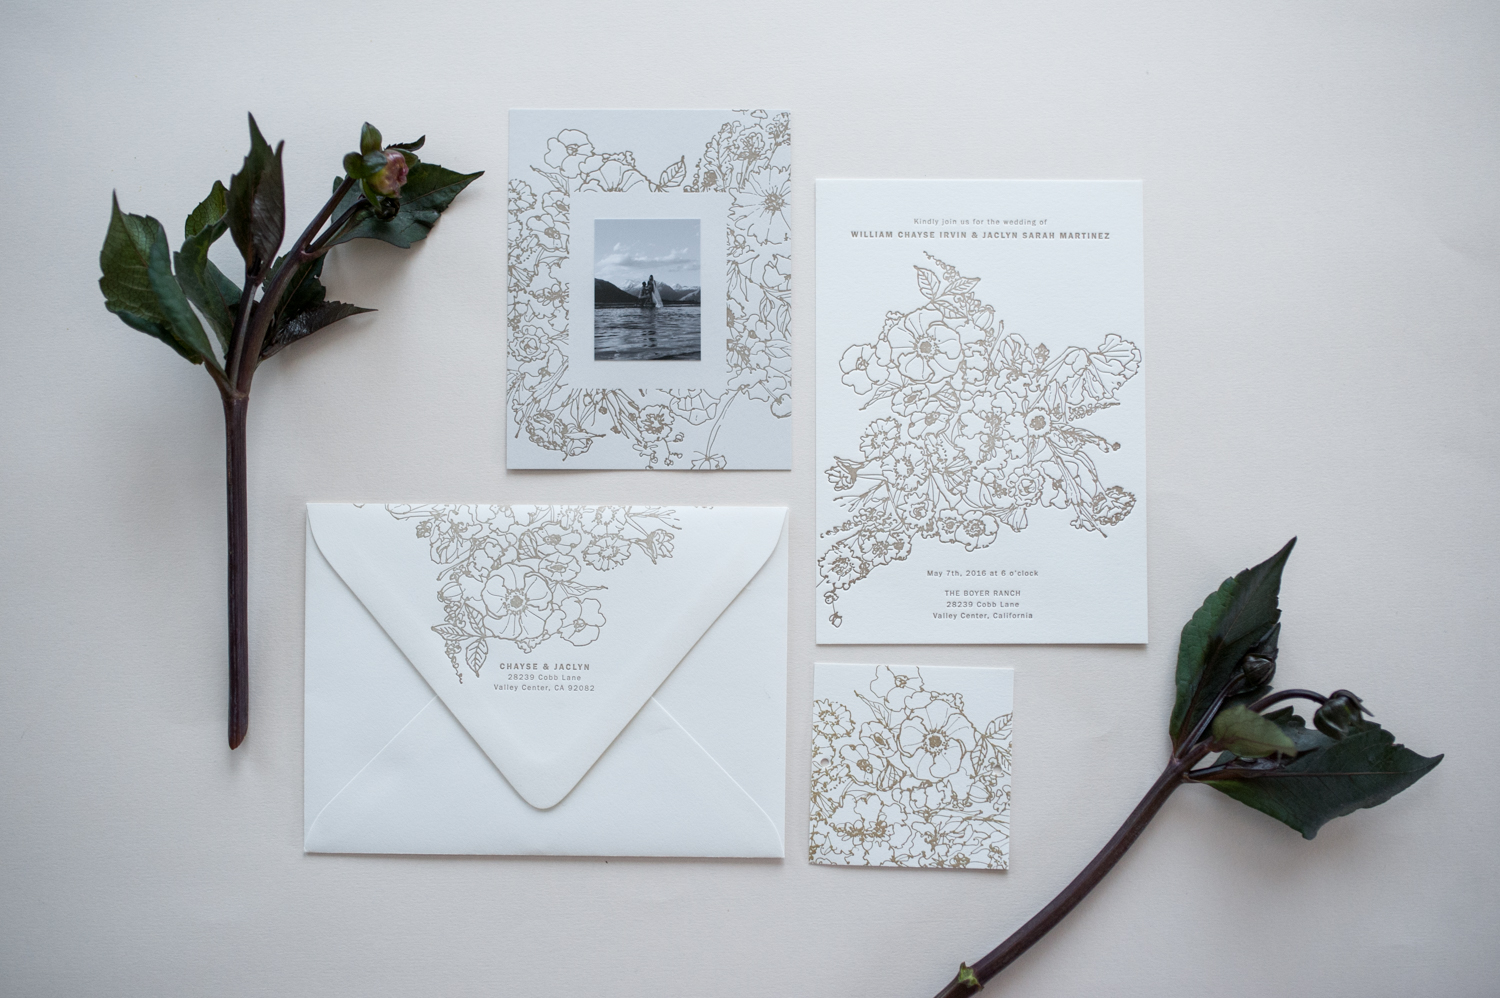 Allover Floral Invitation in Cream by Paper & Type, styling and photography by Emilie Anne Szabo